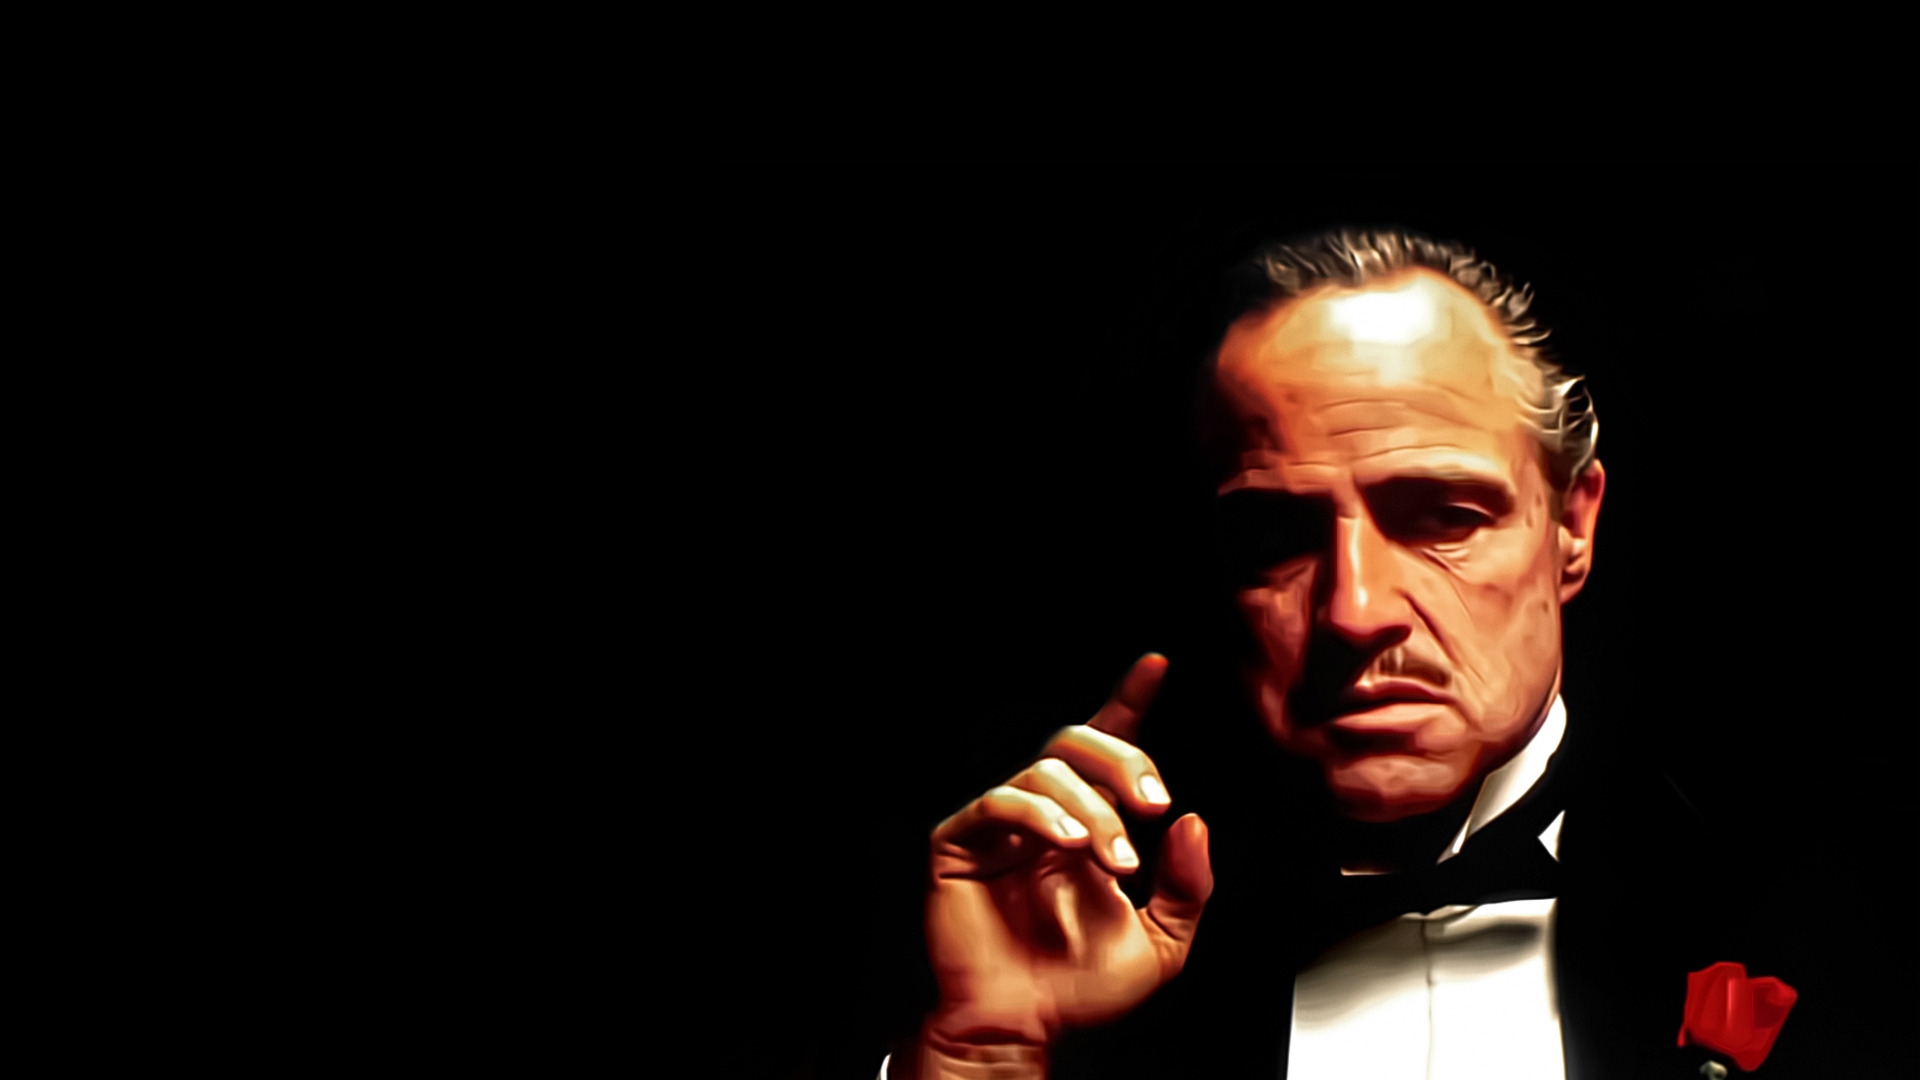 The Godfather Painting for 1920 x 1080 HDTV 1080p resolution